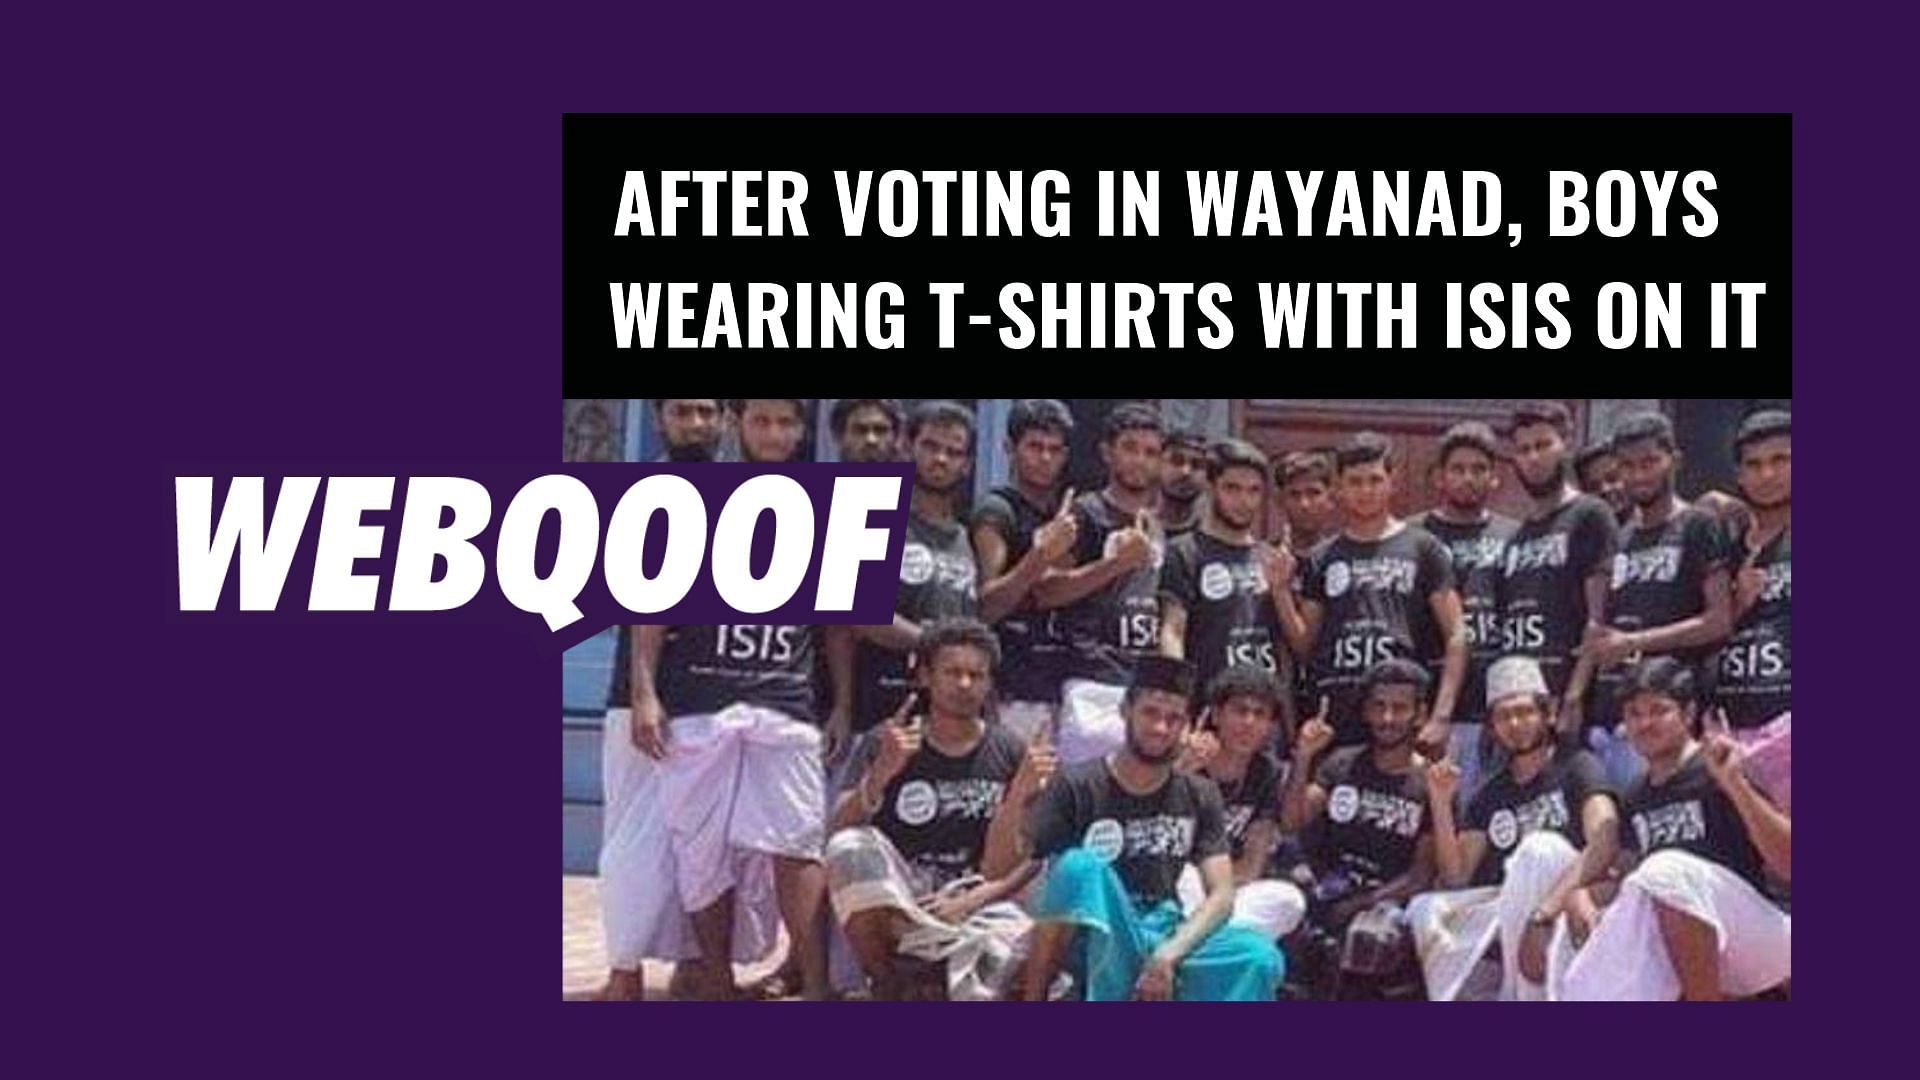 A fake claim alleges that a group of men posed in T-shirts saying ISIS after polling in Kerala’s Wayanad.